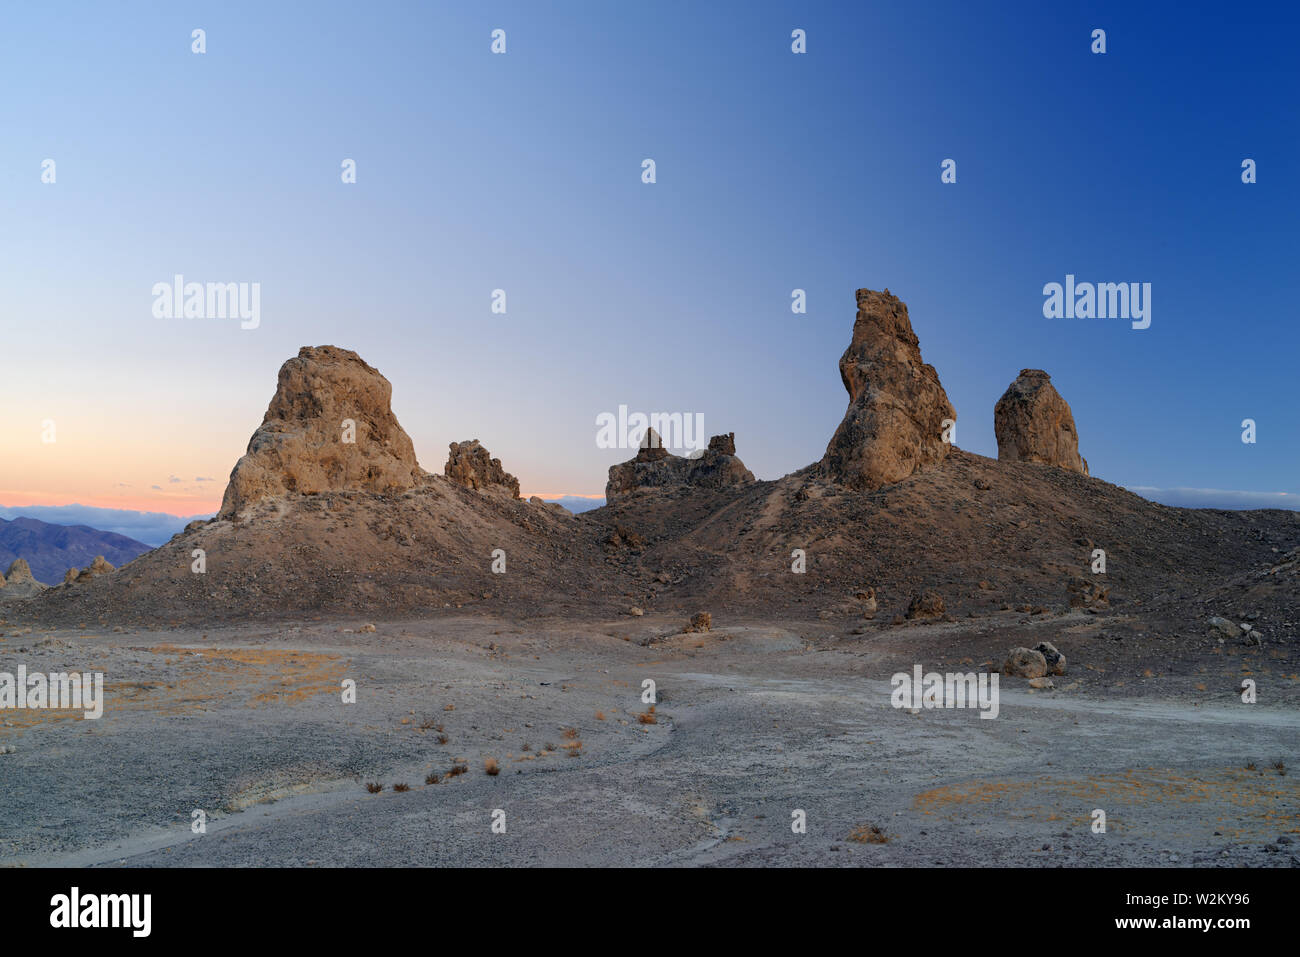 Image of the famous Trona Pinnacles, an unusual geological feature in the California Desert National Conservation Area. Stock Photo